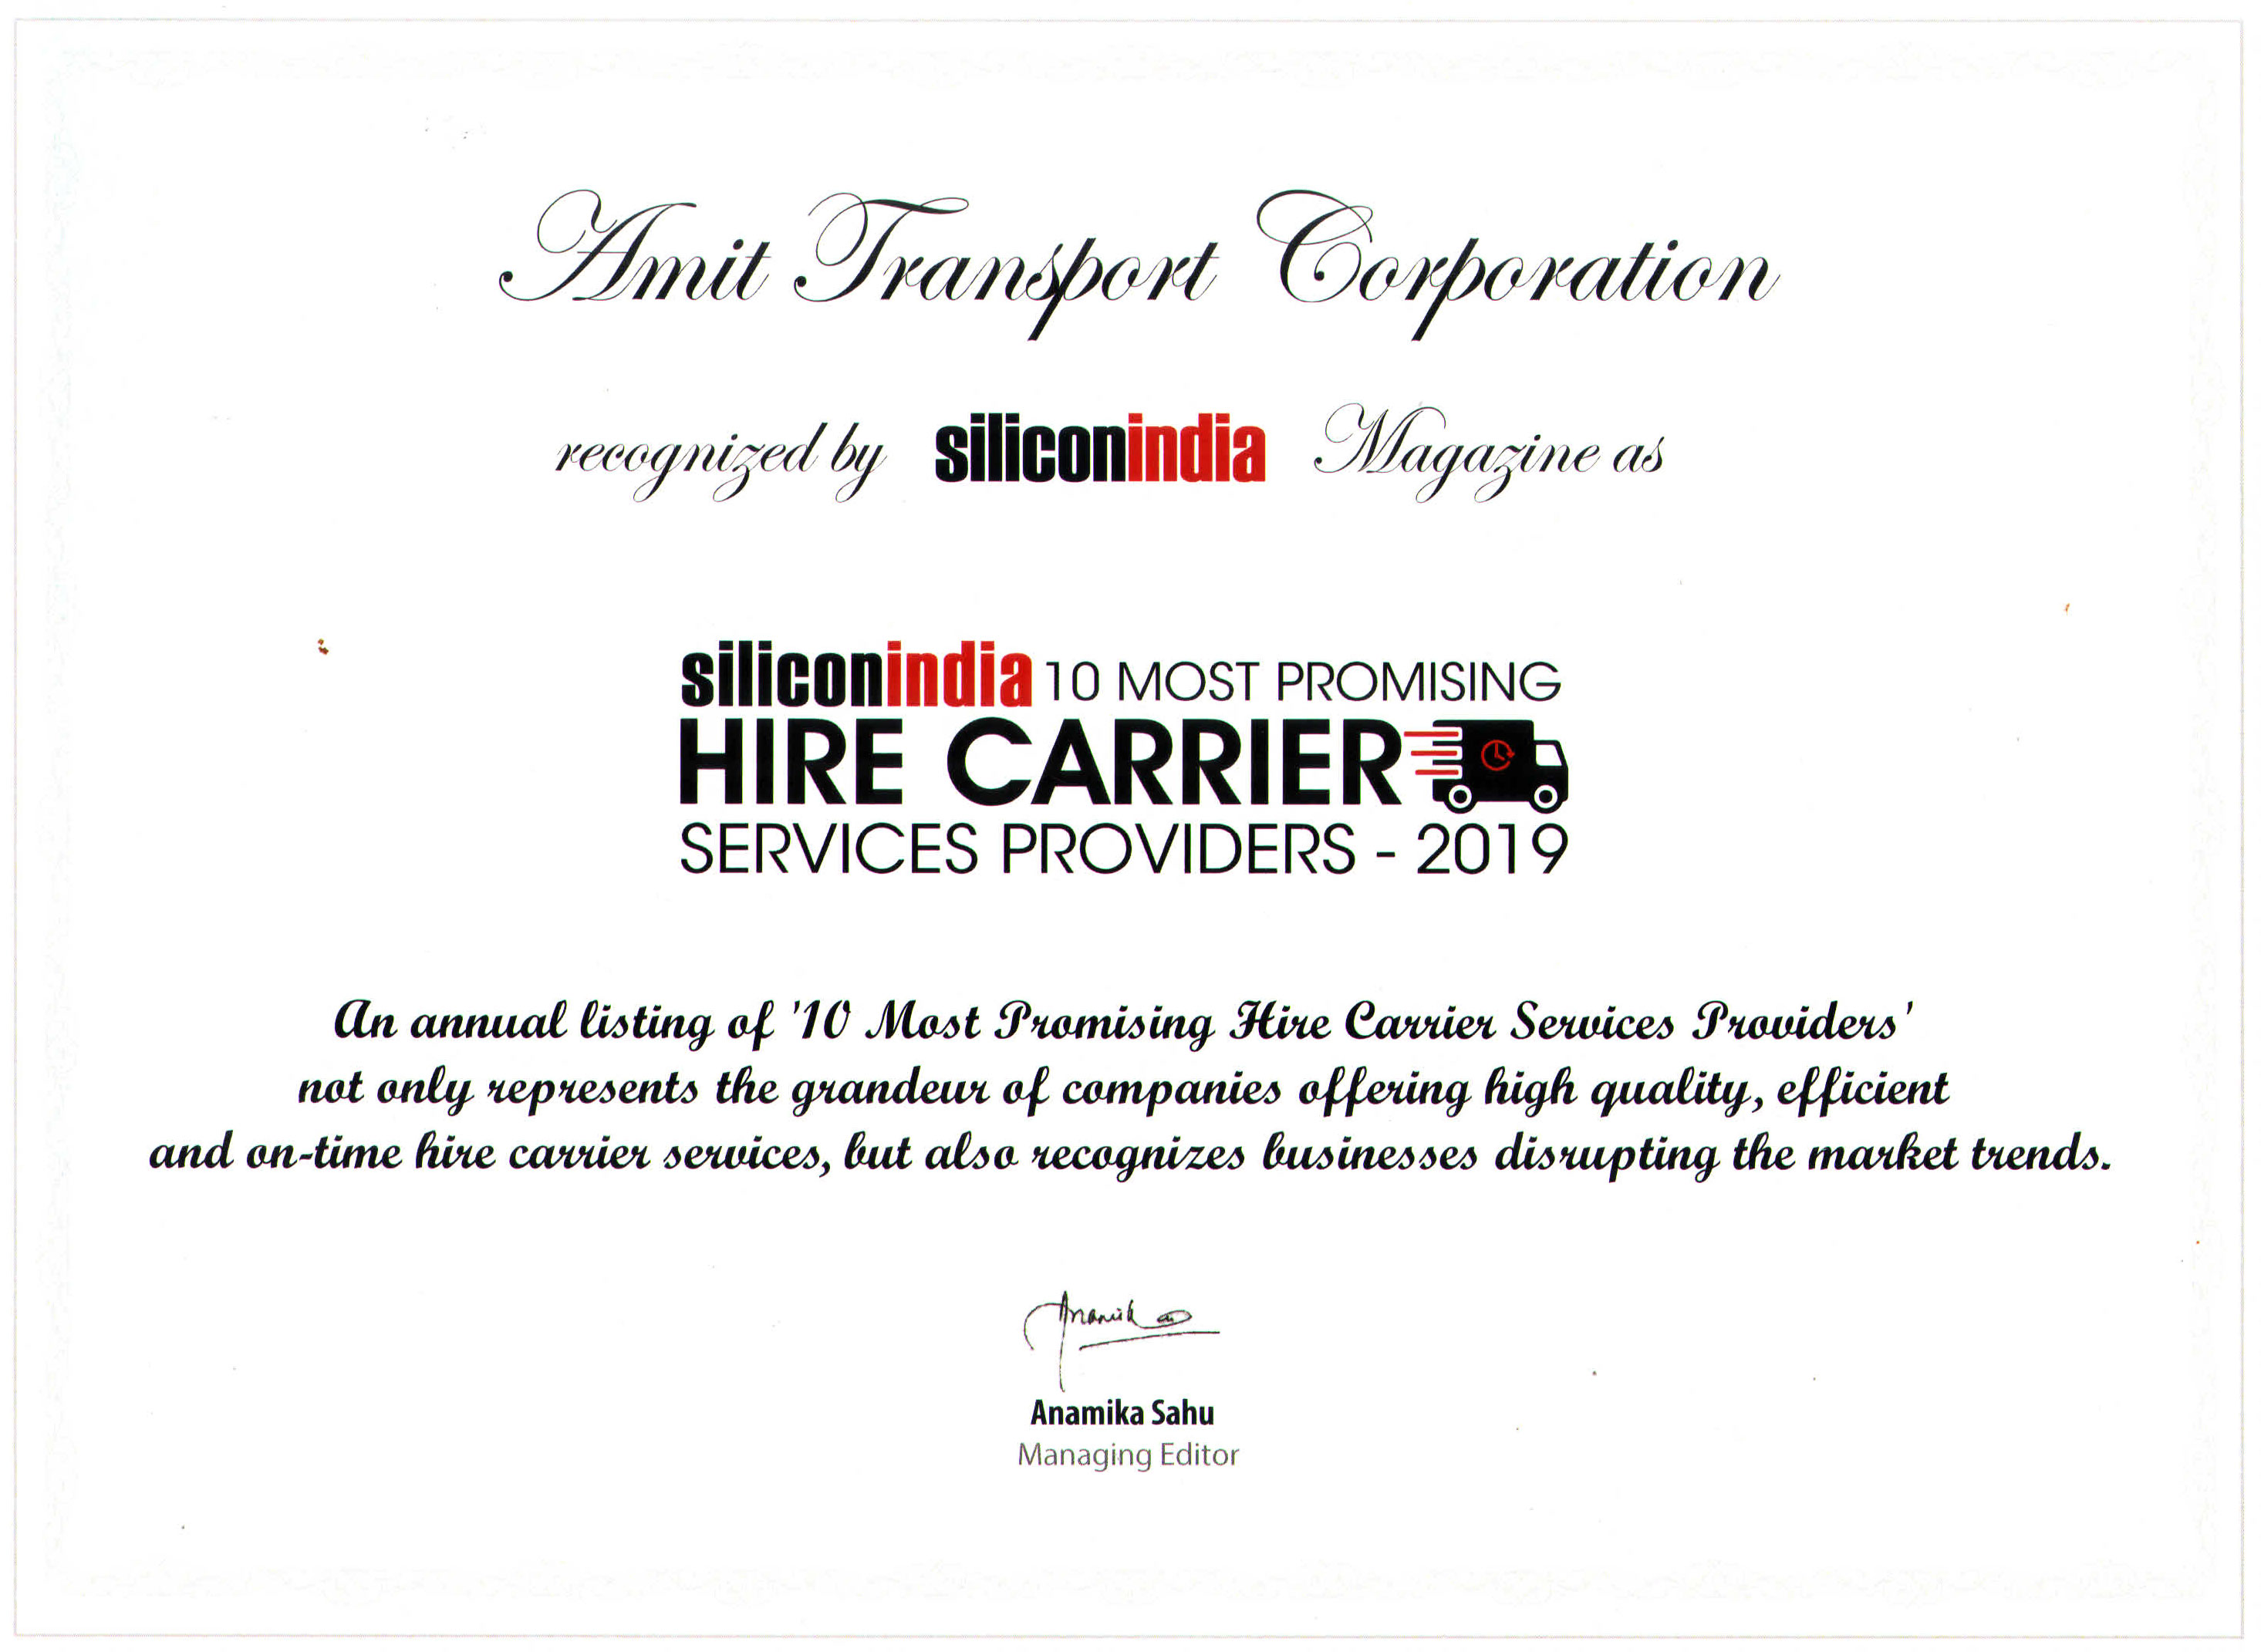 Amit Transport Corporation:
SILICON INDIA HIRE CARRIER